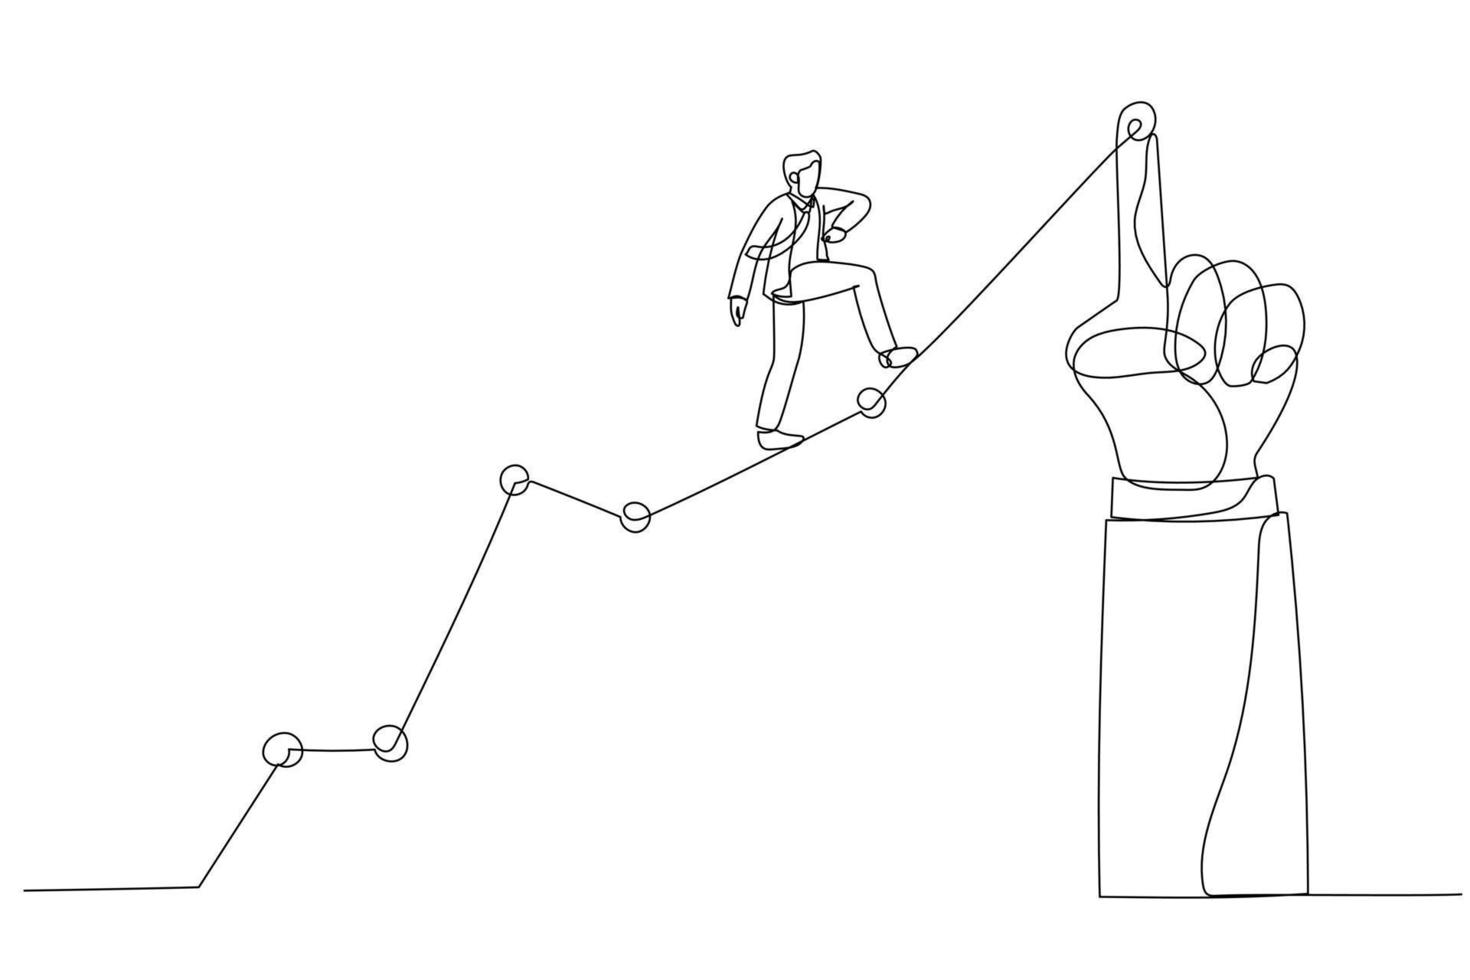 Drawing of businessman running uphill on a line graphic pointed by a giant hand. Single line art style vector